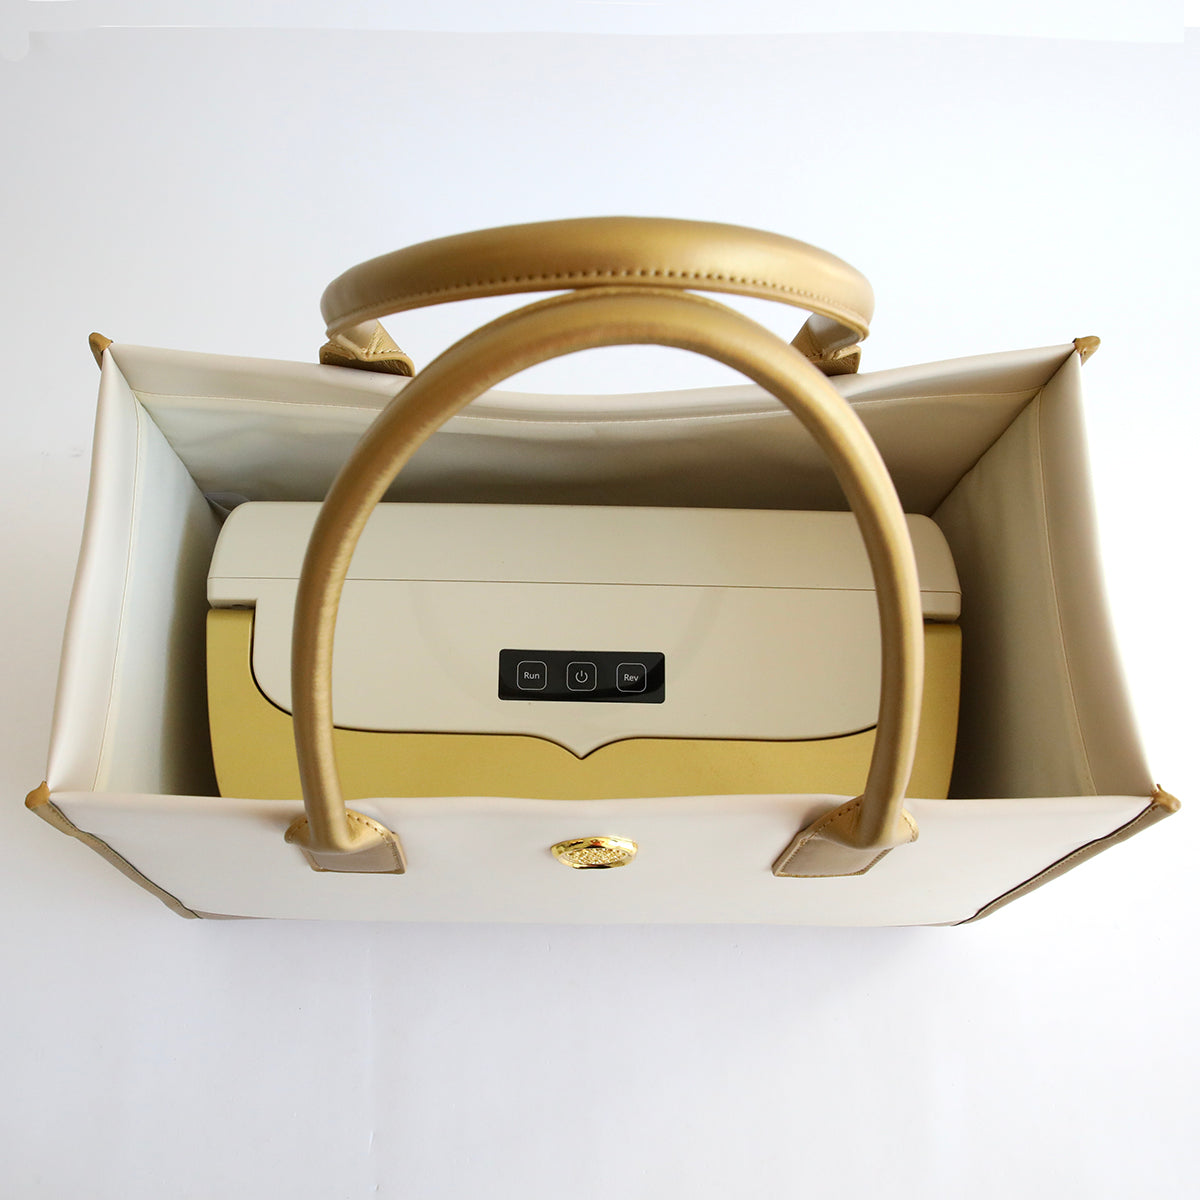 An elegant Empress Machine Tote Bag in an ivory palette with a darker tan handle and accents, placed inside its open box with the interior lining and brand logo visible.